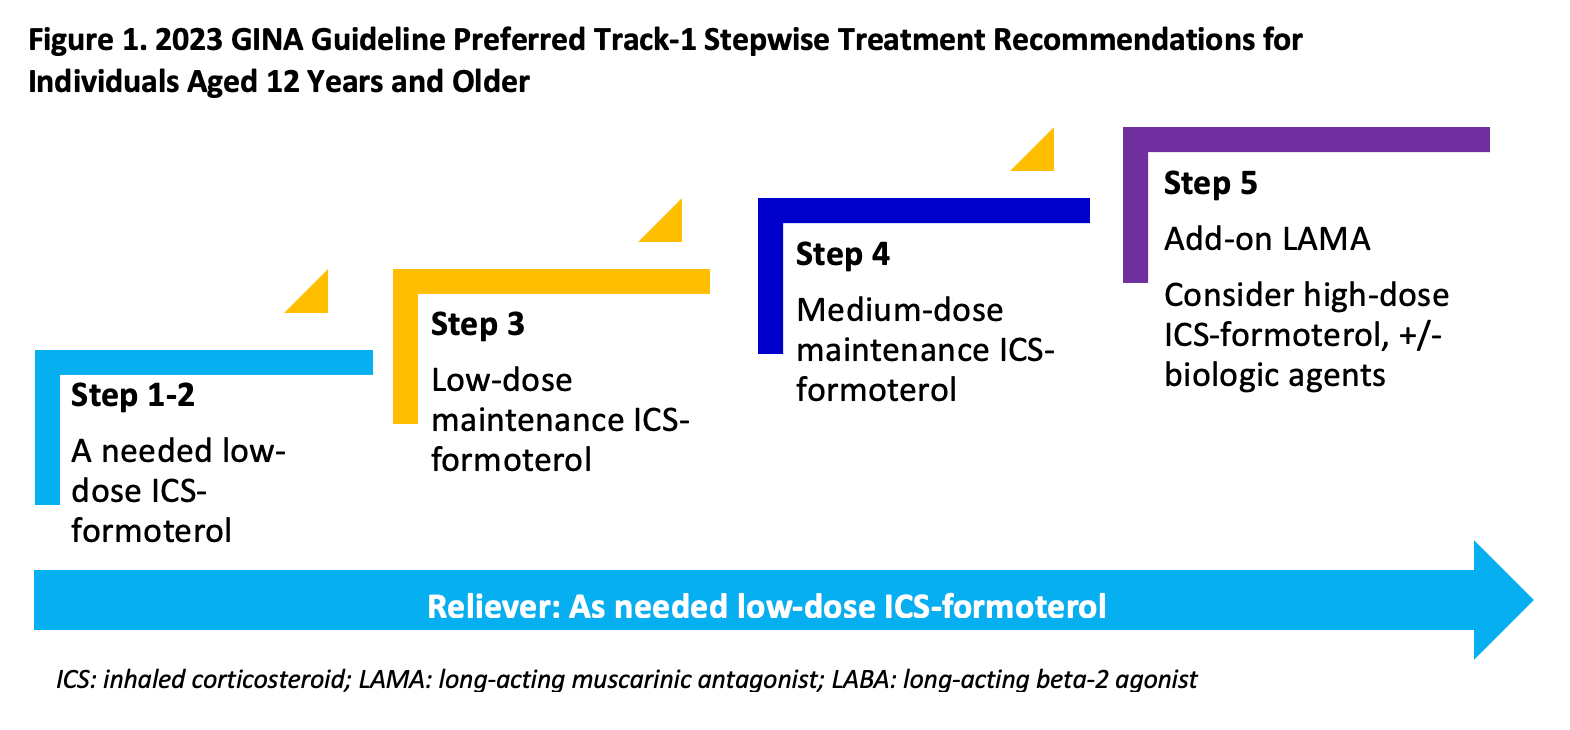 2023 GINA Guideline Preferred Track-1 Stepwise Treatment Recommendations for Individuals Aged 12 Years and Older